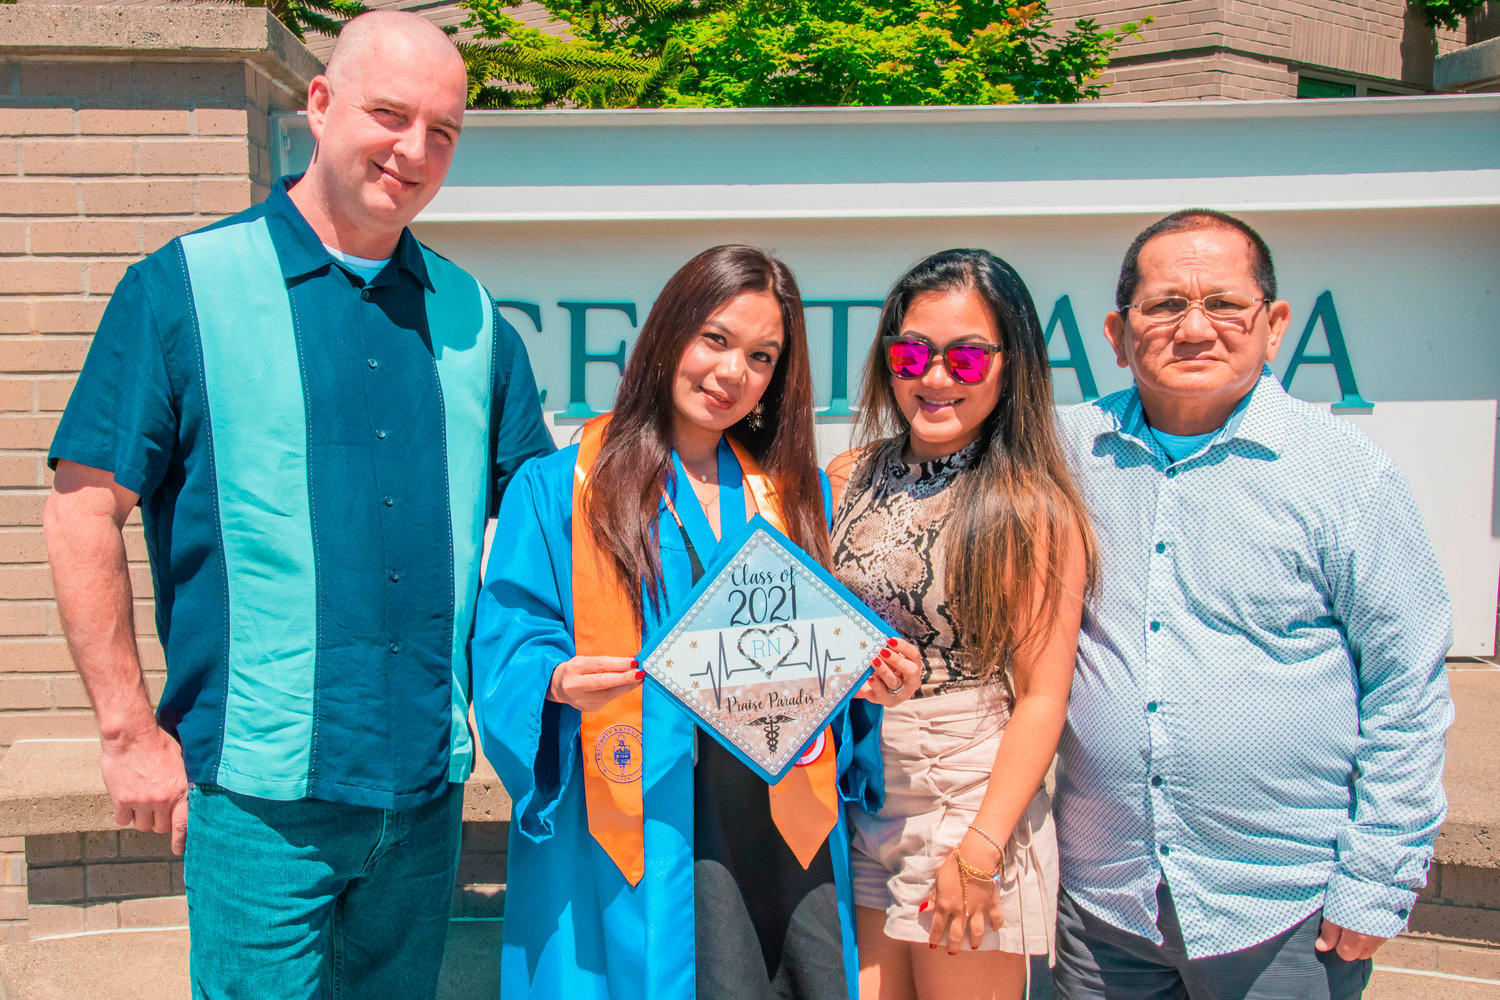 Praise Paradis hols up her decorated cap while posing for a photo in front of the Centralia College sign during a graduation ceremony held on Friday.